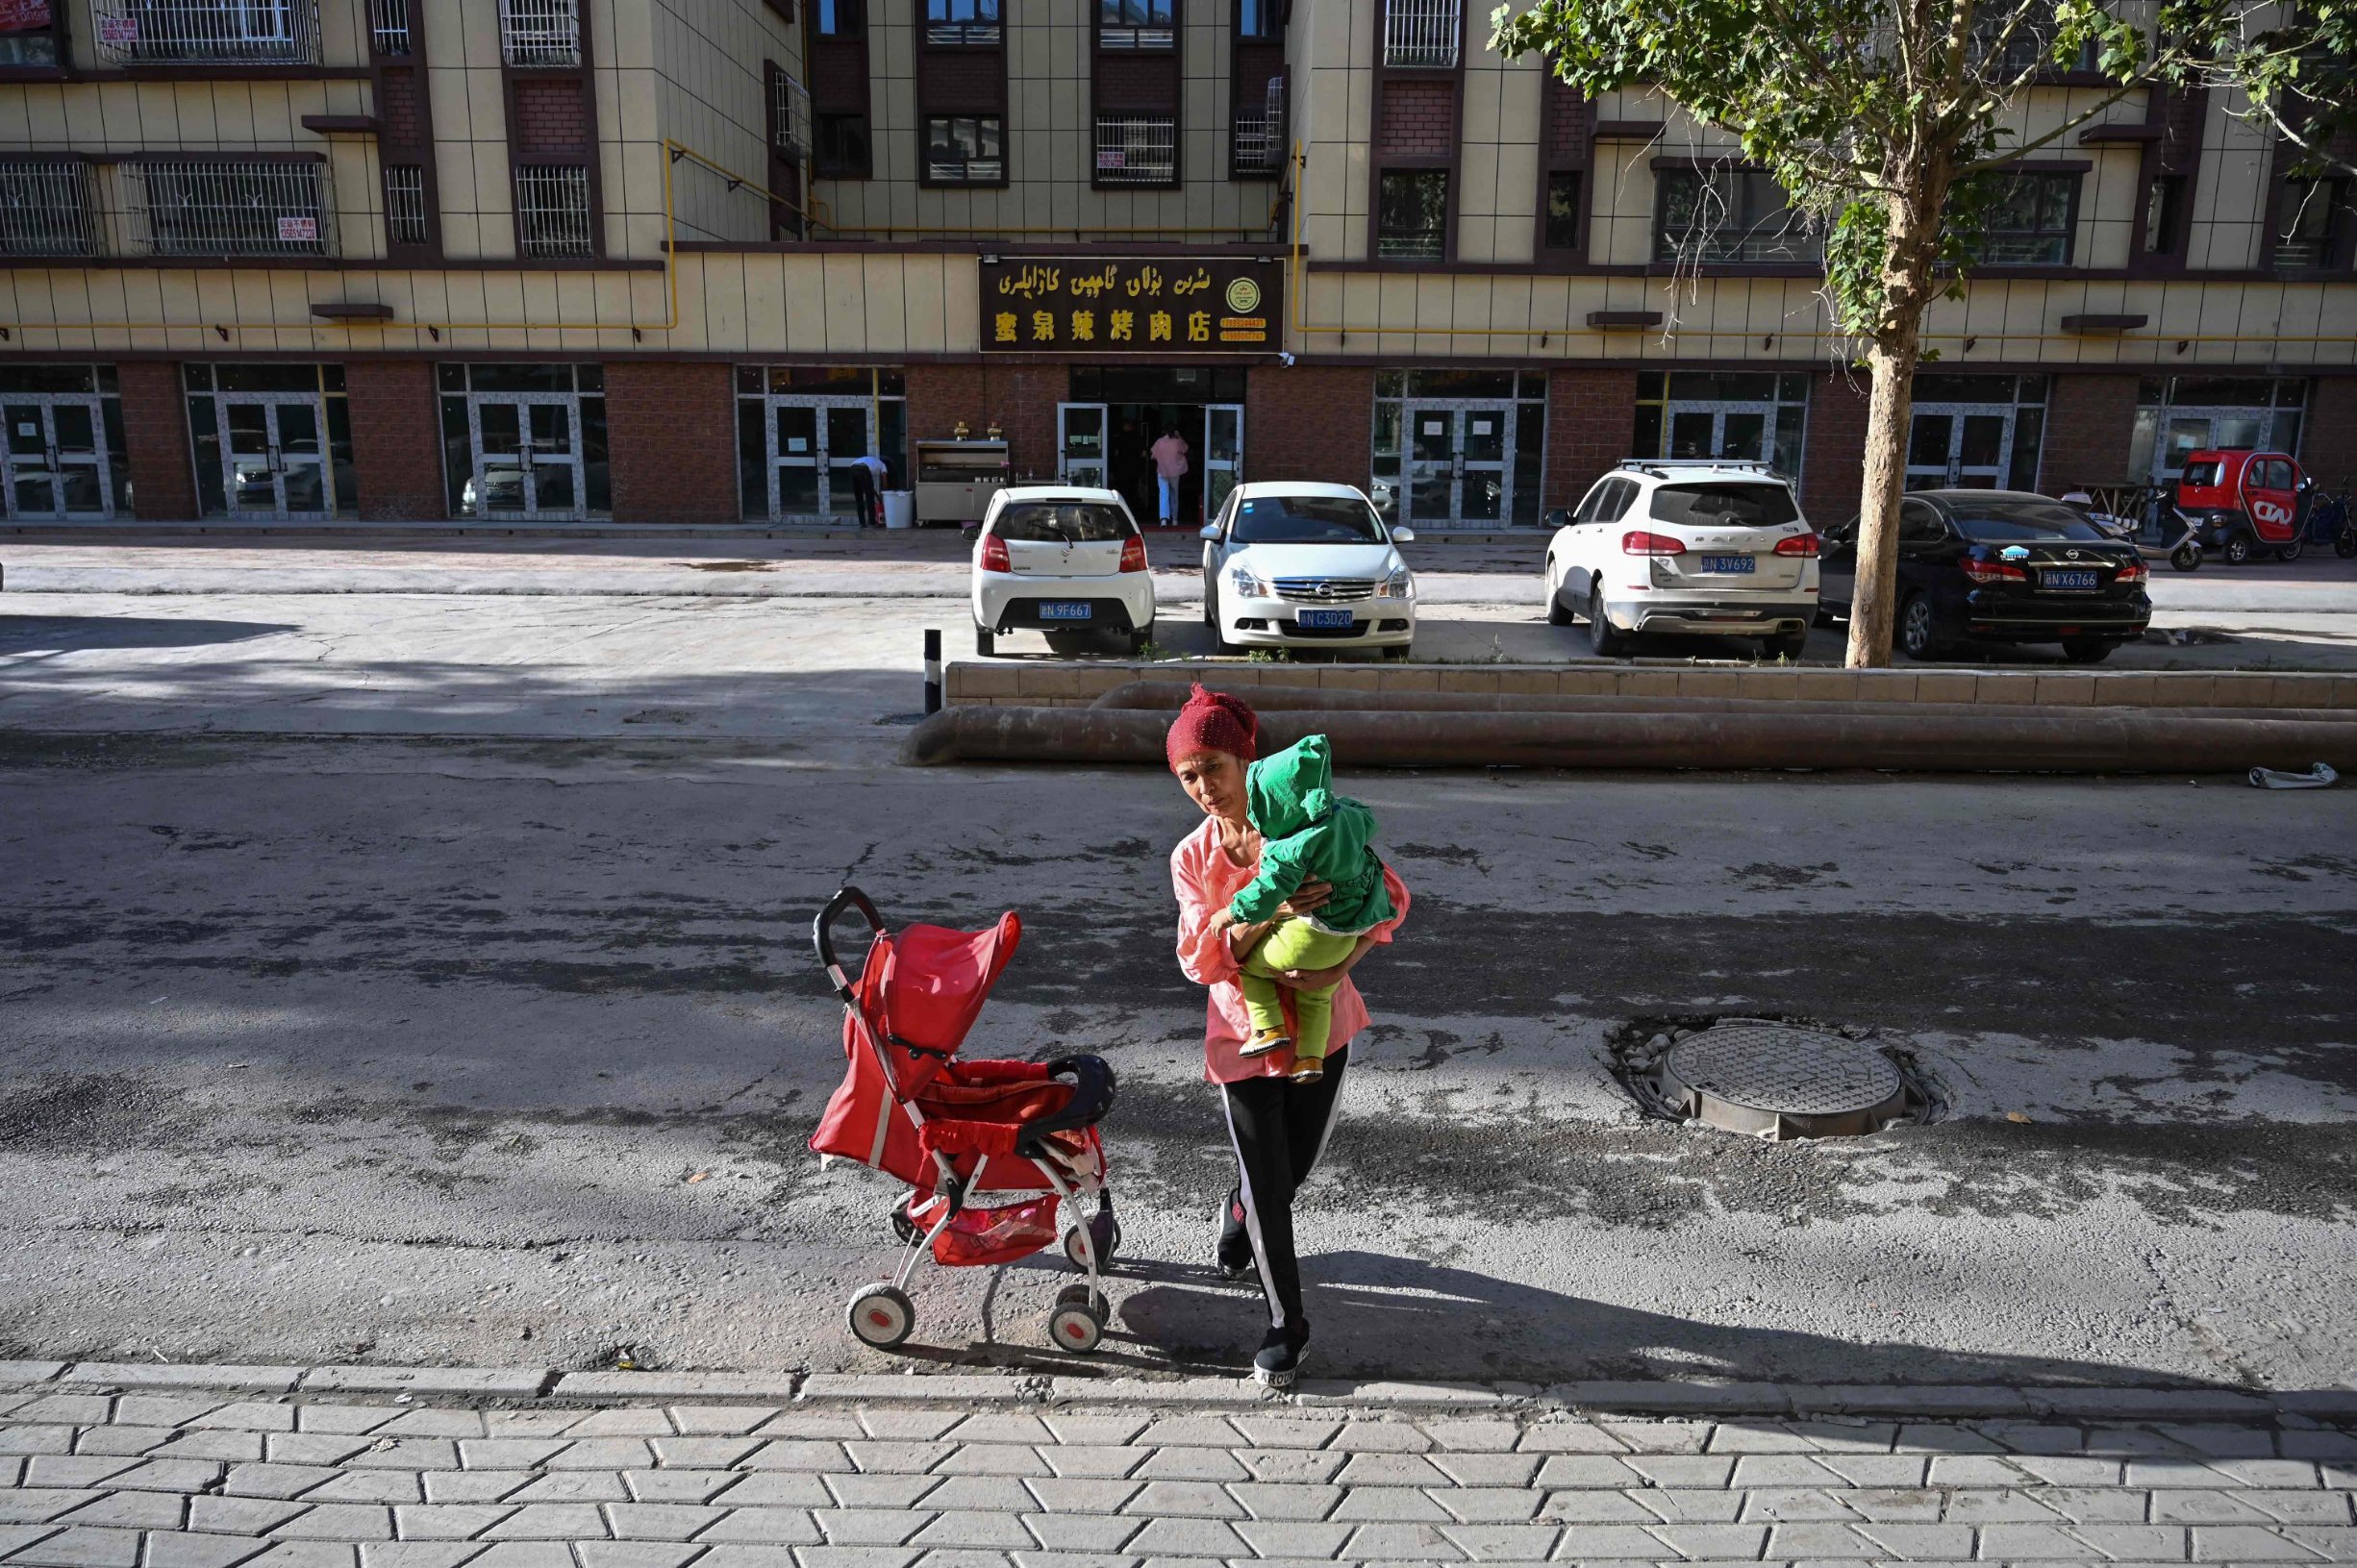 (FILES) This file photo taken on September 11, 2019 shows a woman walking in an ethnic Uighur neighbourhood in Aksu in China's northwest Xinjiang region. - Chinese authorities are carrying out forced sterilisations of women in an apparent campaign to curb the growth of ethnic minority populations in the western Xinjiang region, according to research published on June 29, 2020. (Photo by HECTOR RETAMAL / AFP)